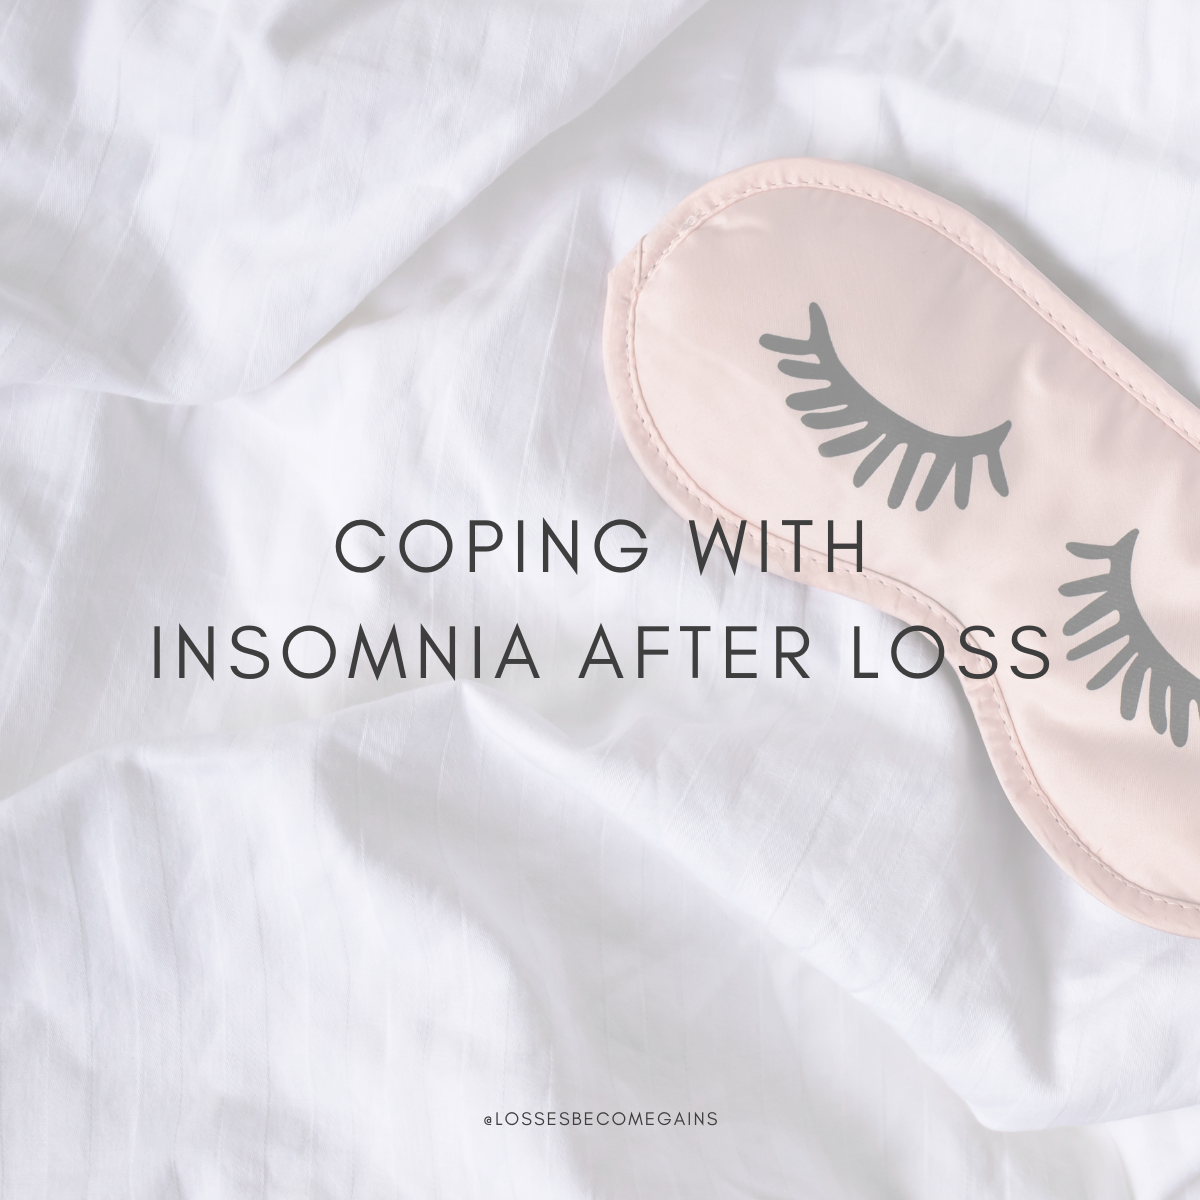 Coping with poor sleep after loss